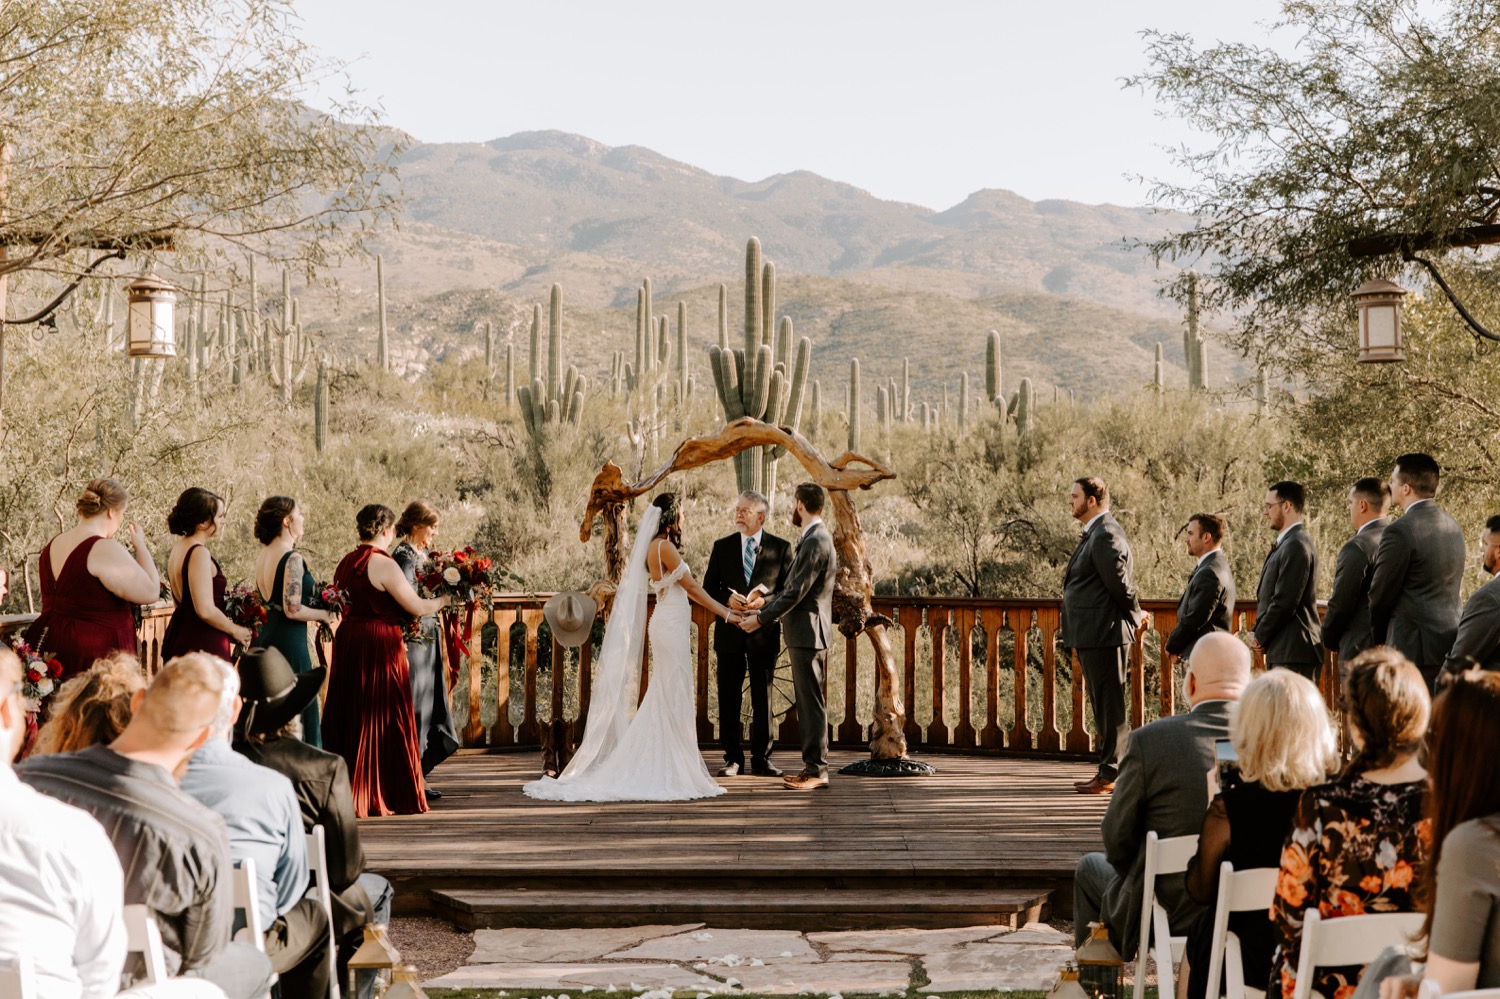 The ceremony site at Tanque Verde Ranch